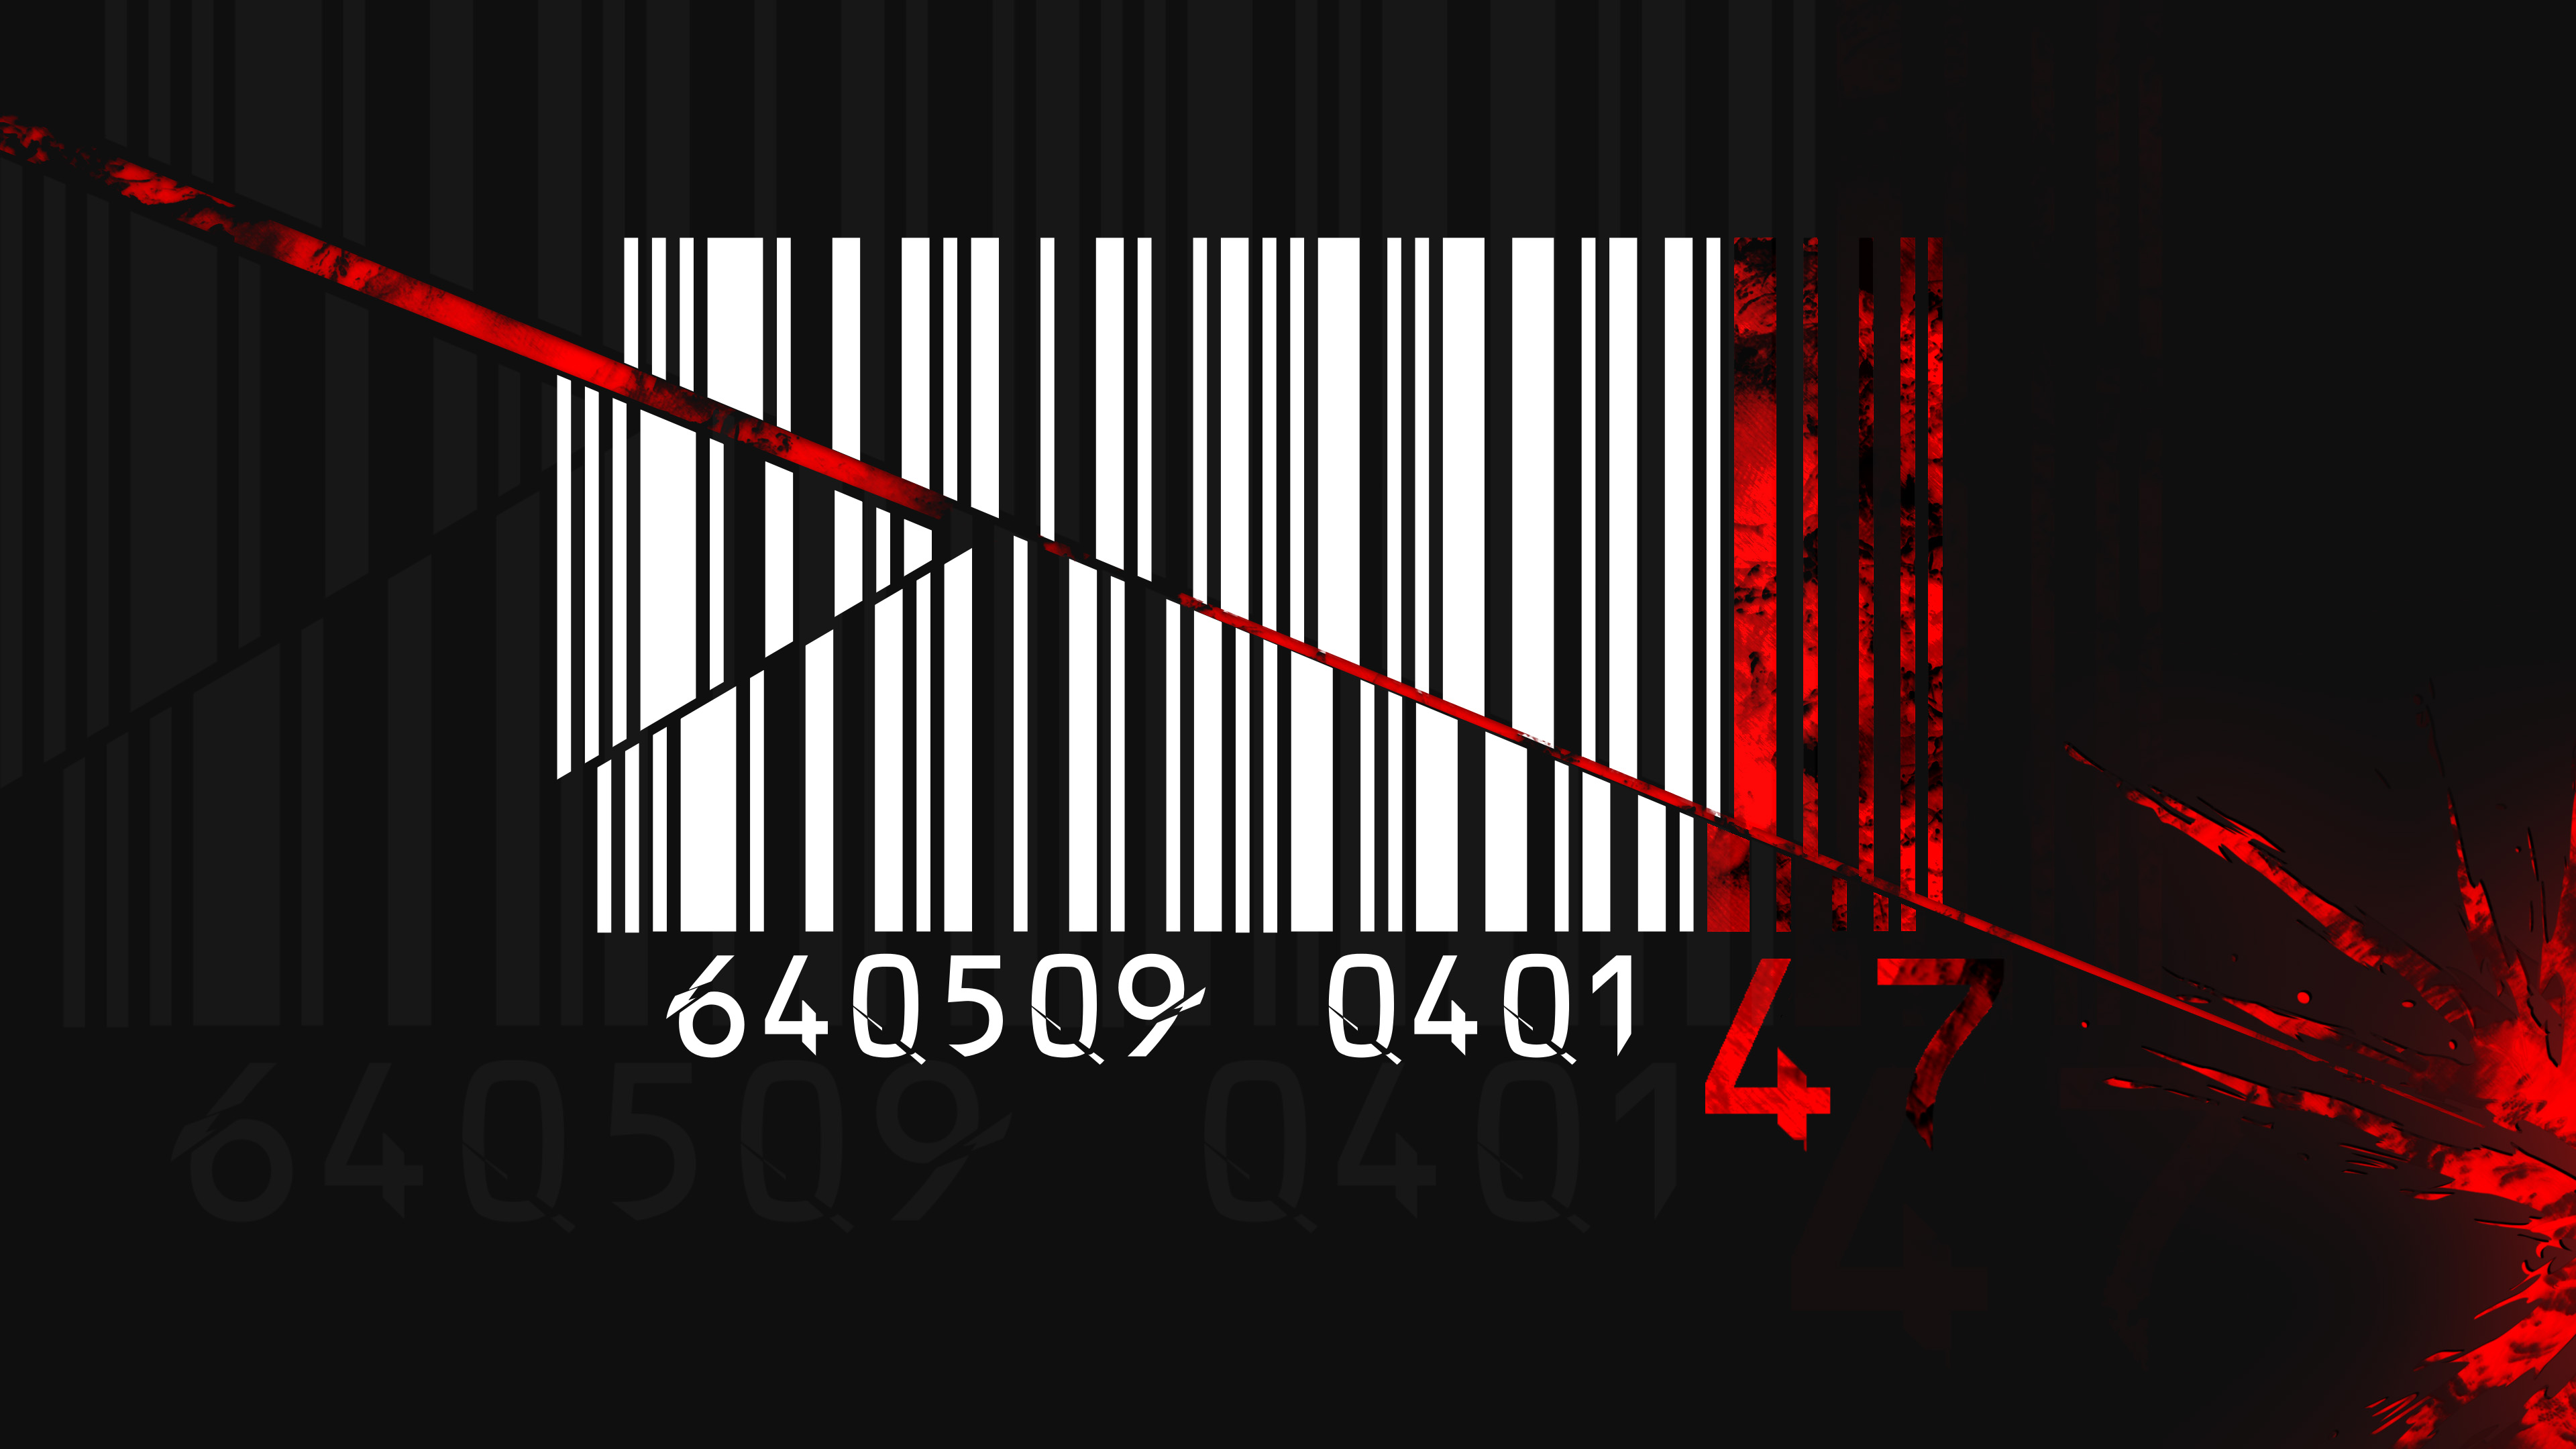 hitman, video game, hitman: absolution, agent 47, barcode